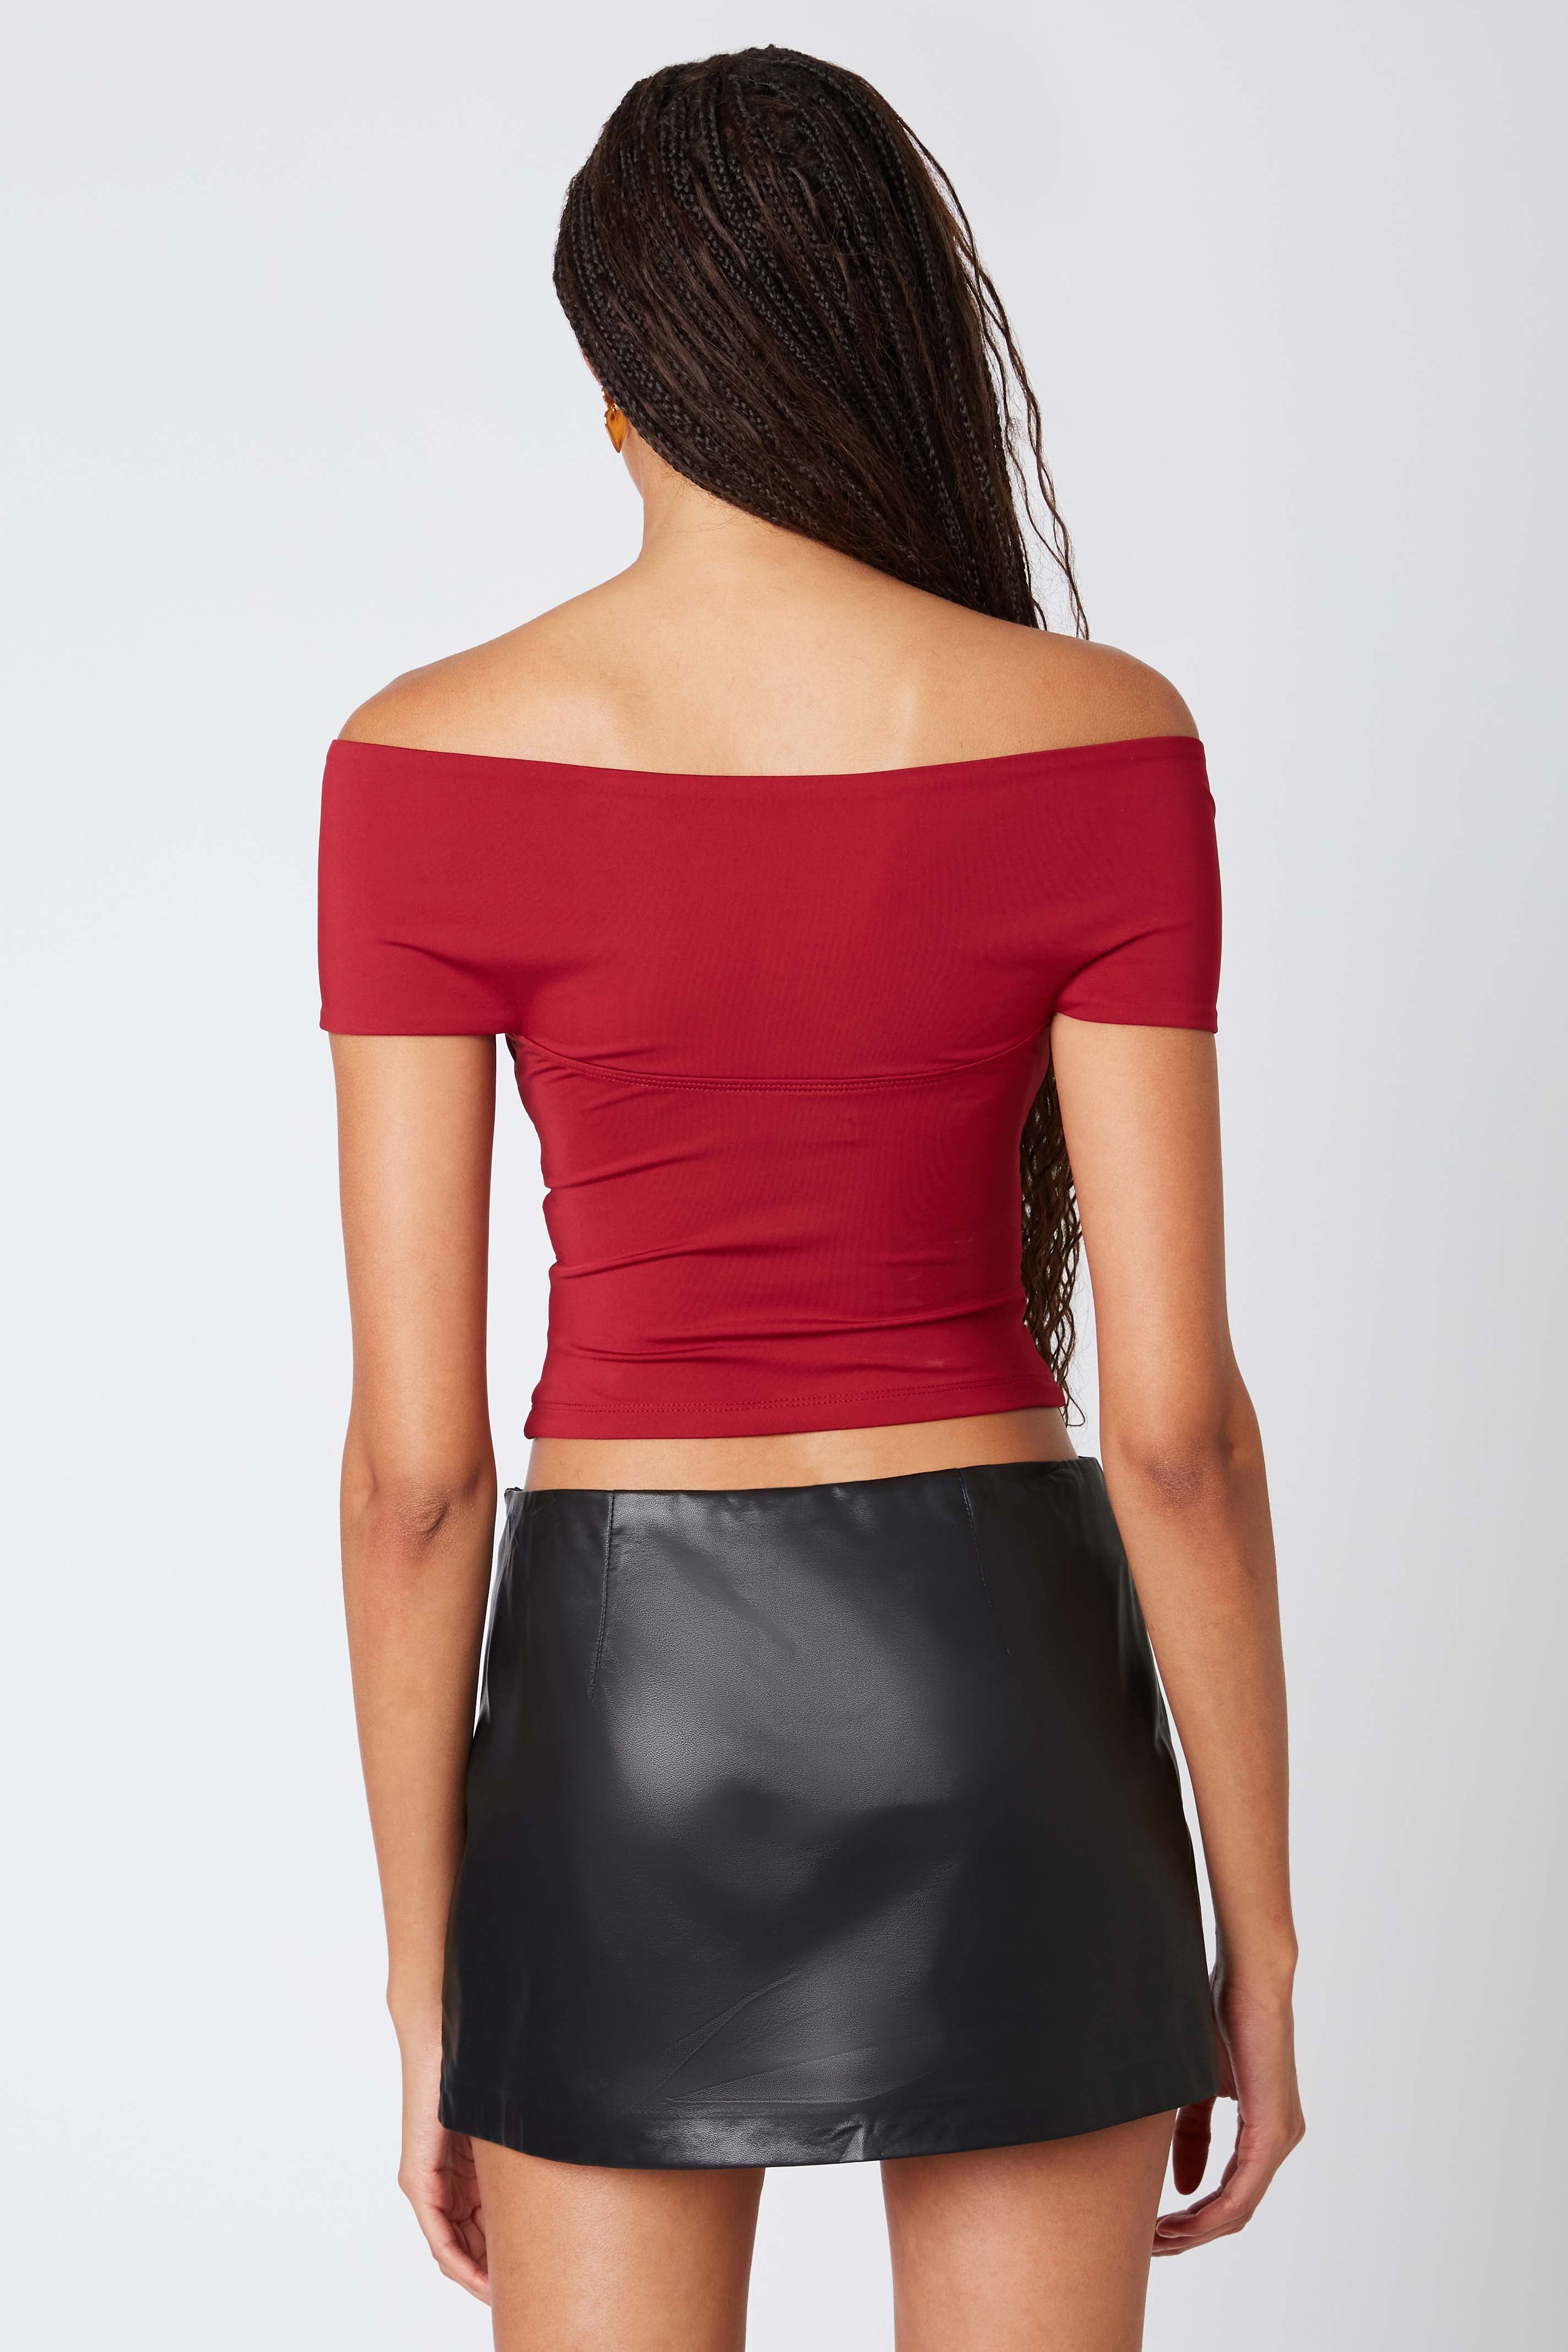 Criss Cross Off The Shoulder Top in Crimson Back View